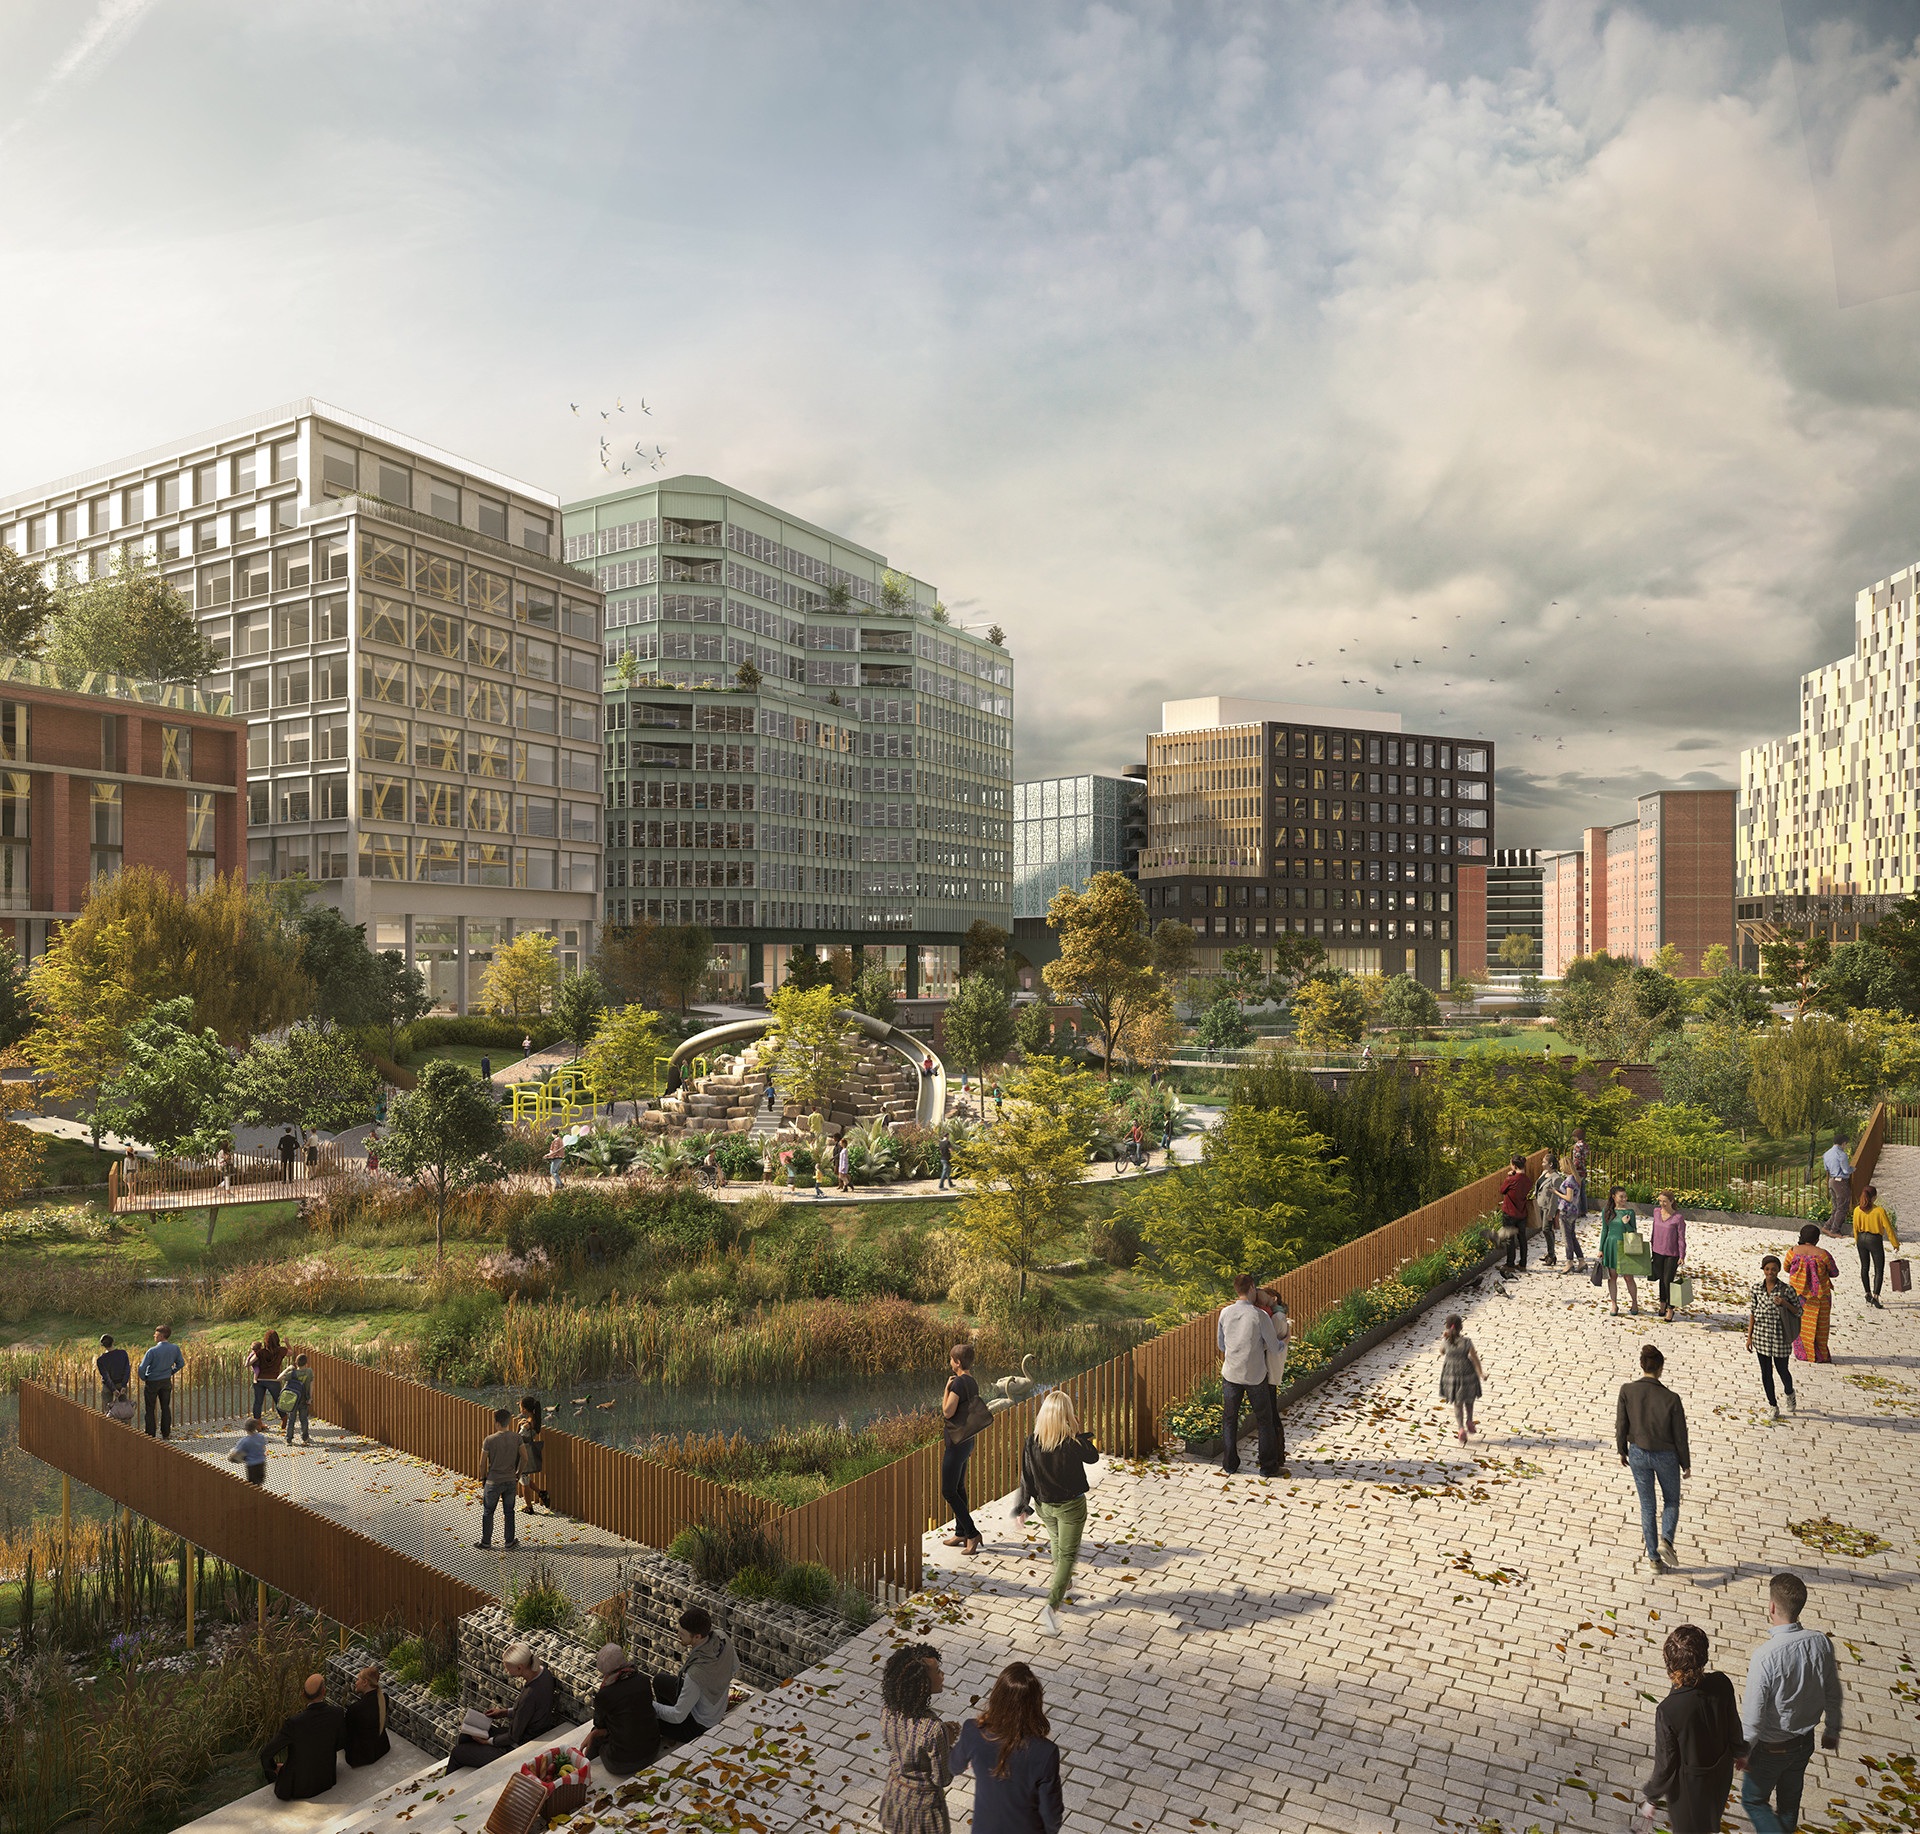 A computer generated image showing what the Mayfield Manchester development could look like. There are high rise buildings in the background, a park with a winding path and trees in the middleground, and lots of people walking along in the foreground. It is clear that wildlife is at the focus.